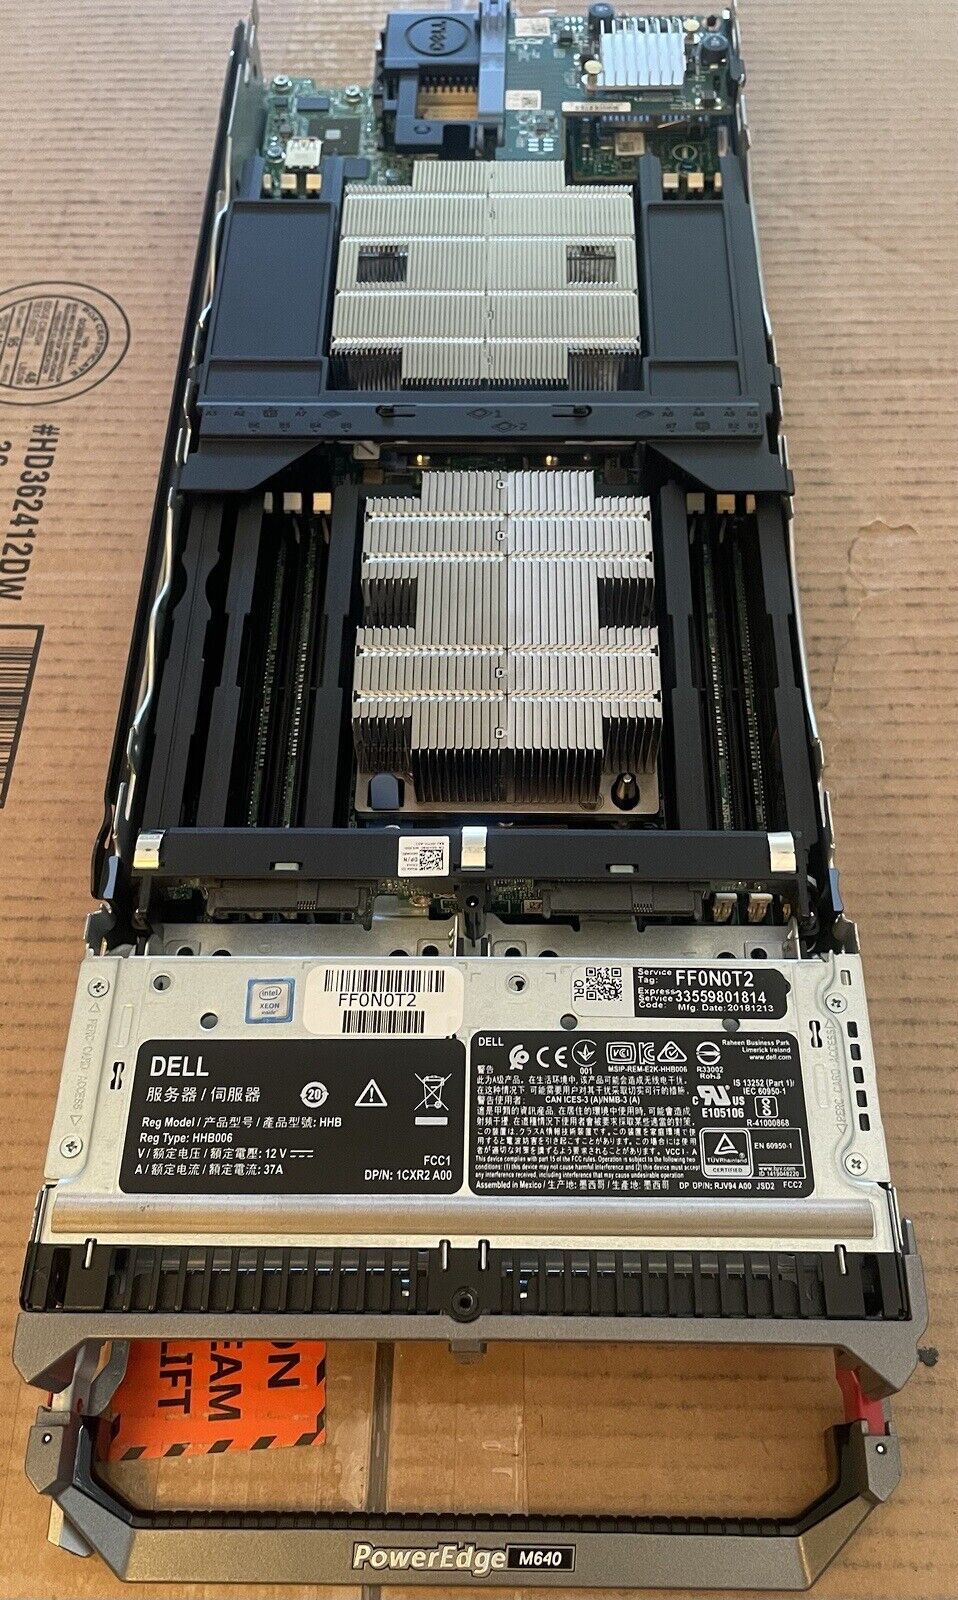 Dell PowerEdge M640 Qty.2 Gold 6126 CPUS Blade Server